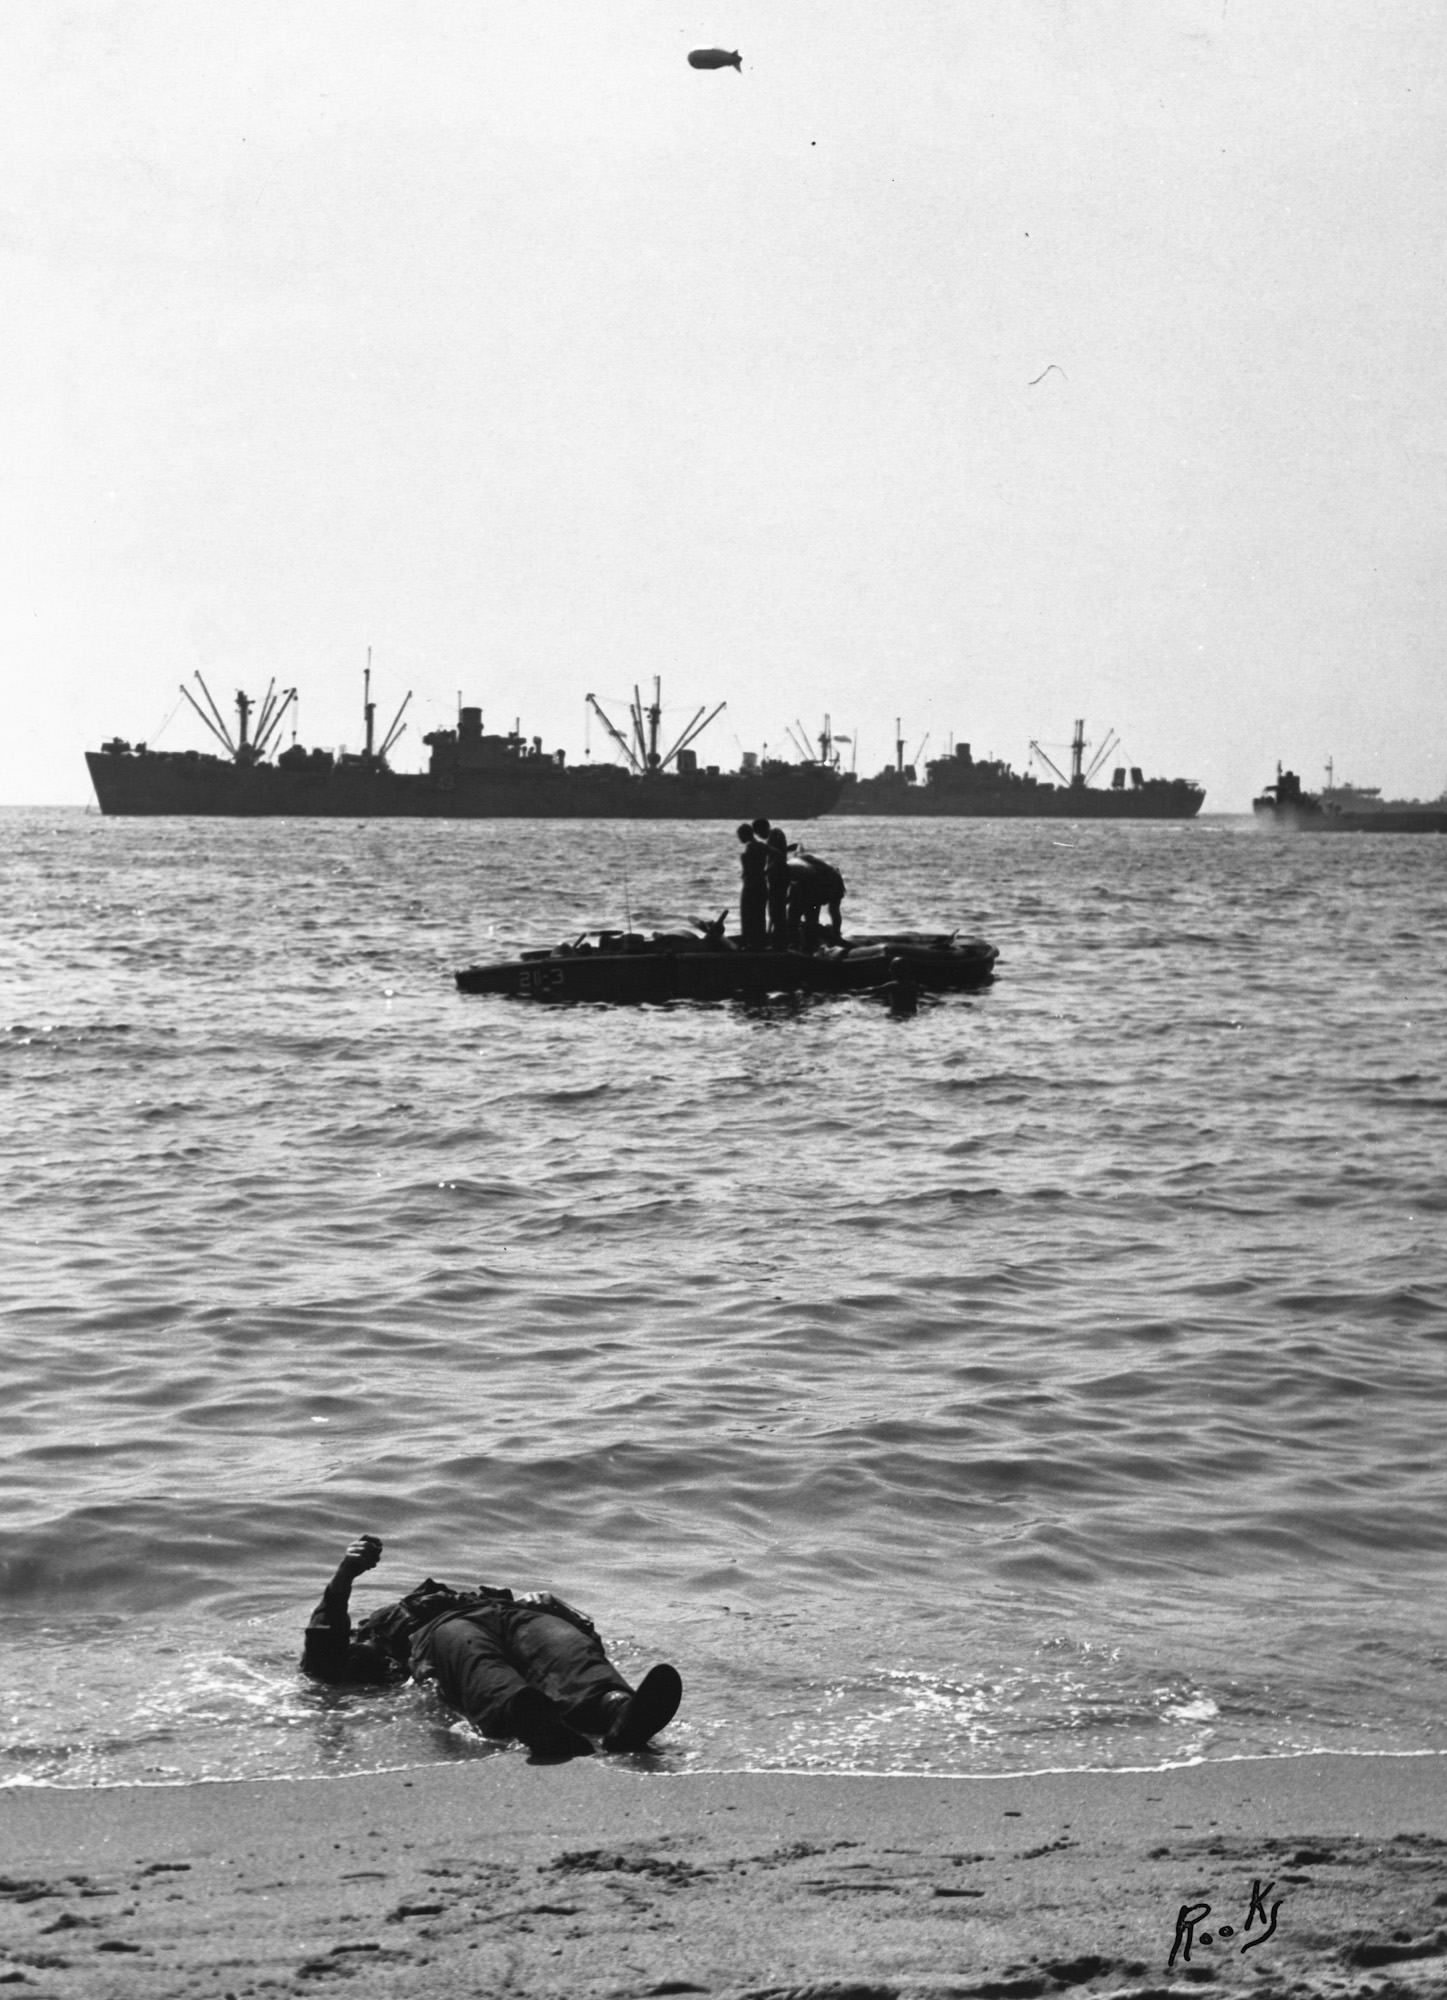 This image is part of my grandfather John Baker's "warbook" from World War II. The likely date of this image is August 15, 1944 according to notes written in the Warbook. According to the US Coast Guard ship history, the likely location for this is Baie de Cavalaire. This image was taken by Dale Rooks, as seen by his signature in the lower right. Dale Rooks and John Baker were both about the USS Duane, which was a Coast Guard cutter ship. View full size.